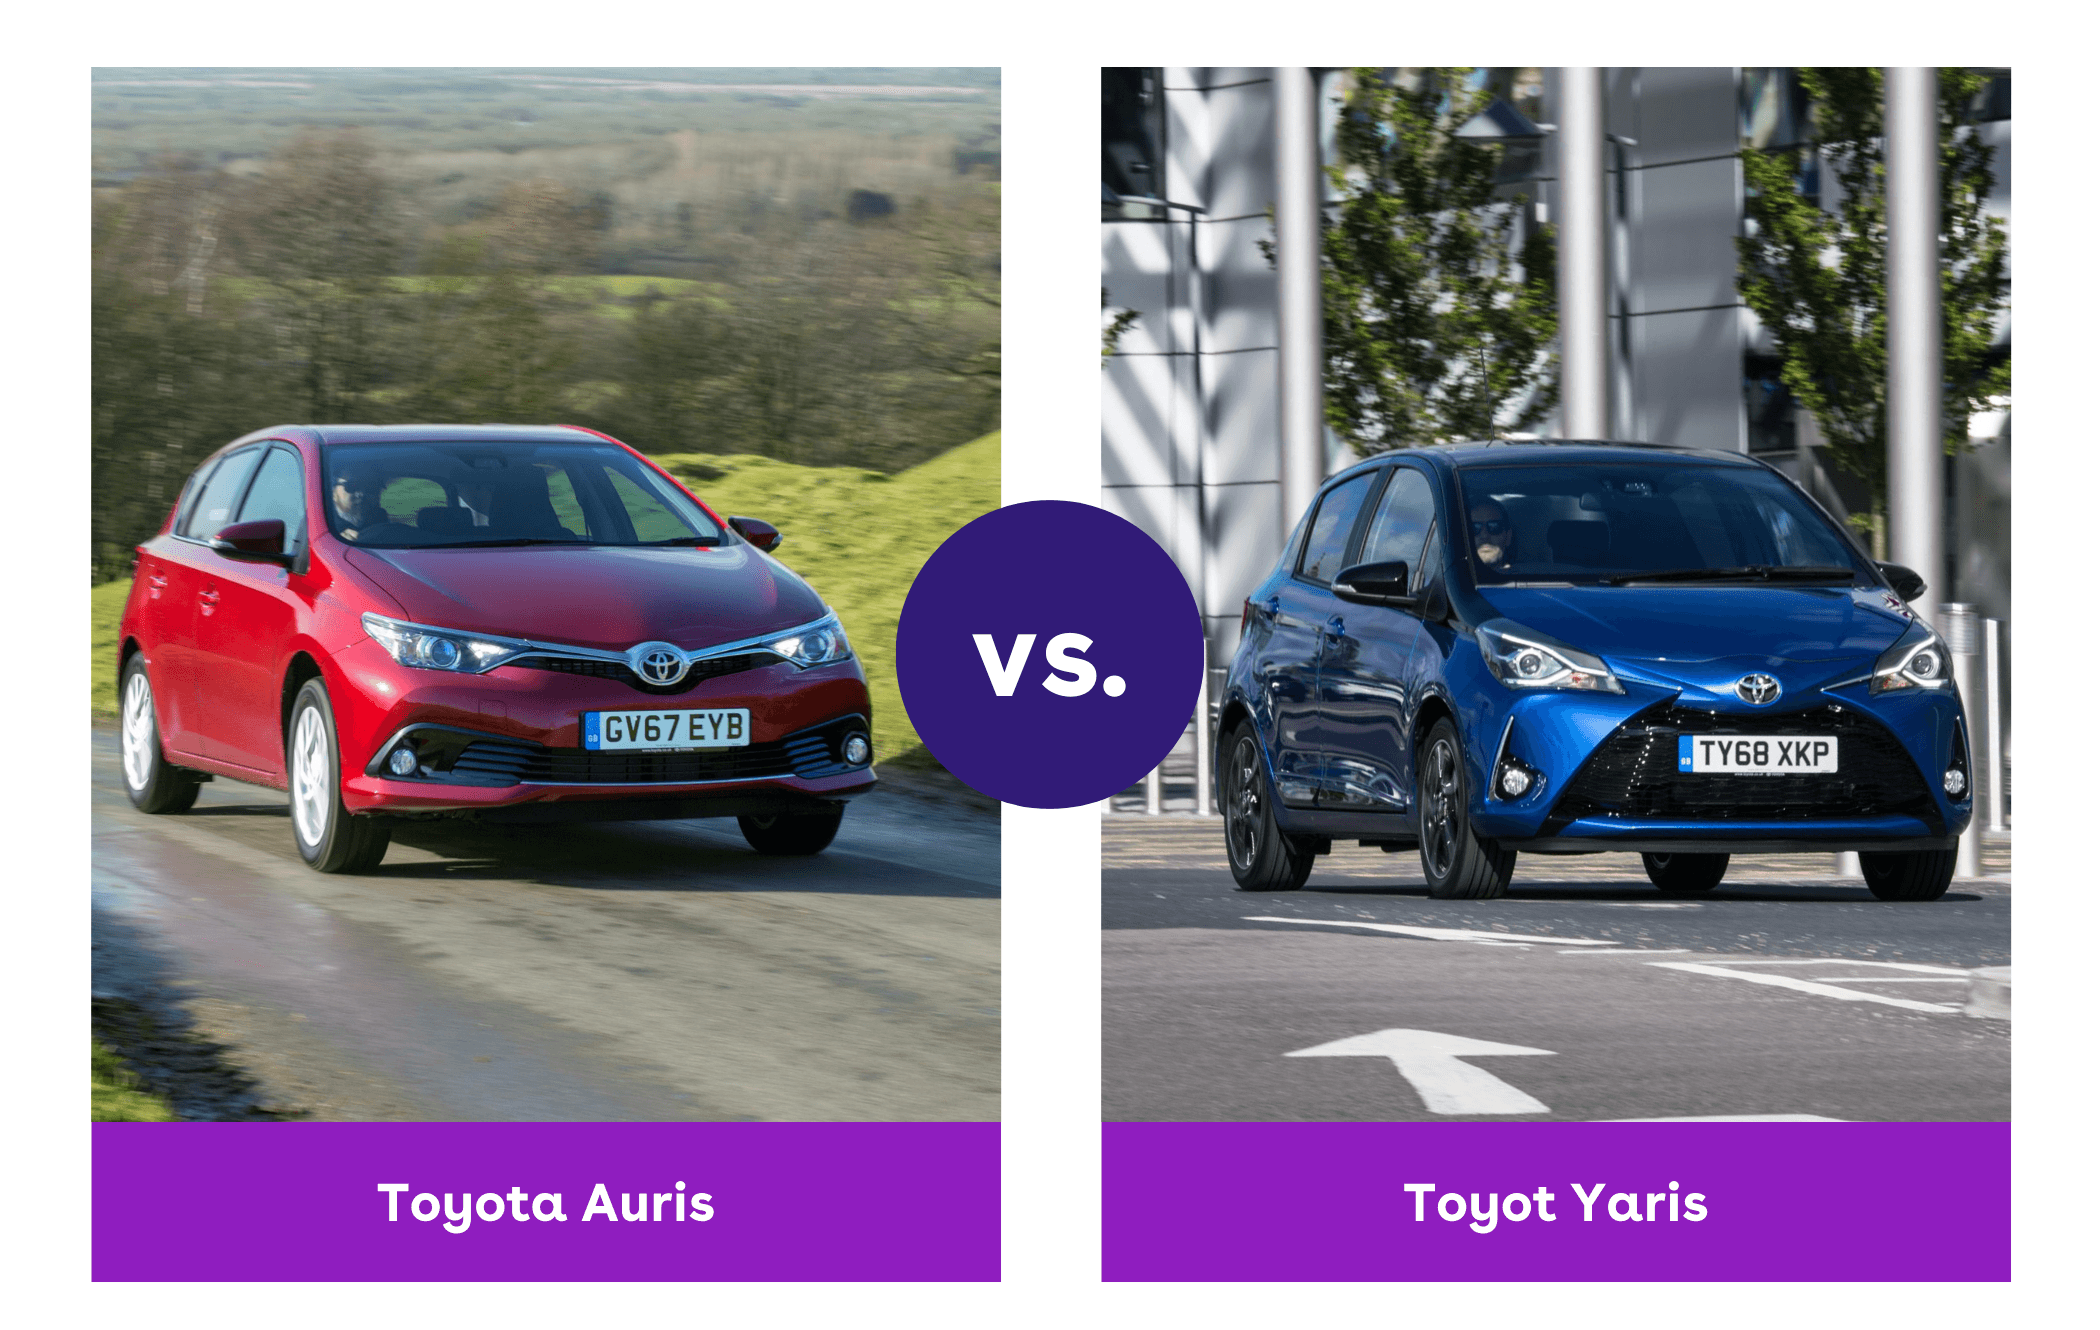 Side-by-side shot of Toyota Auris and Toyota Yaris driving